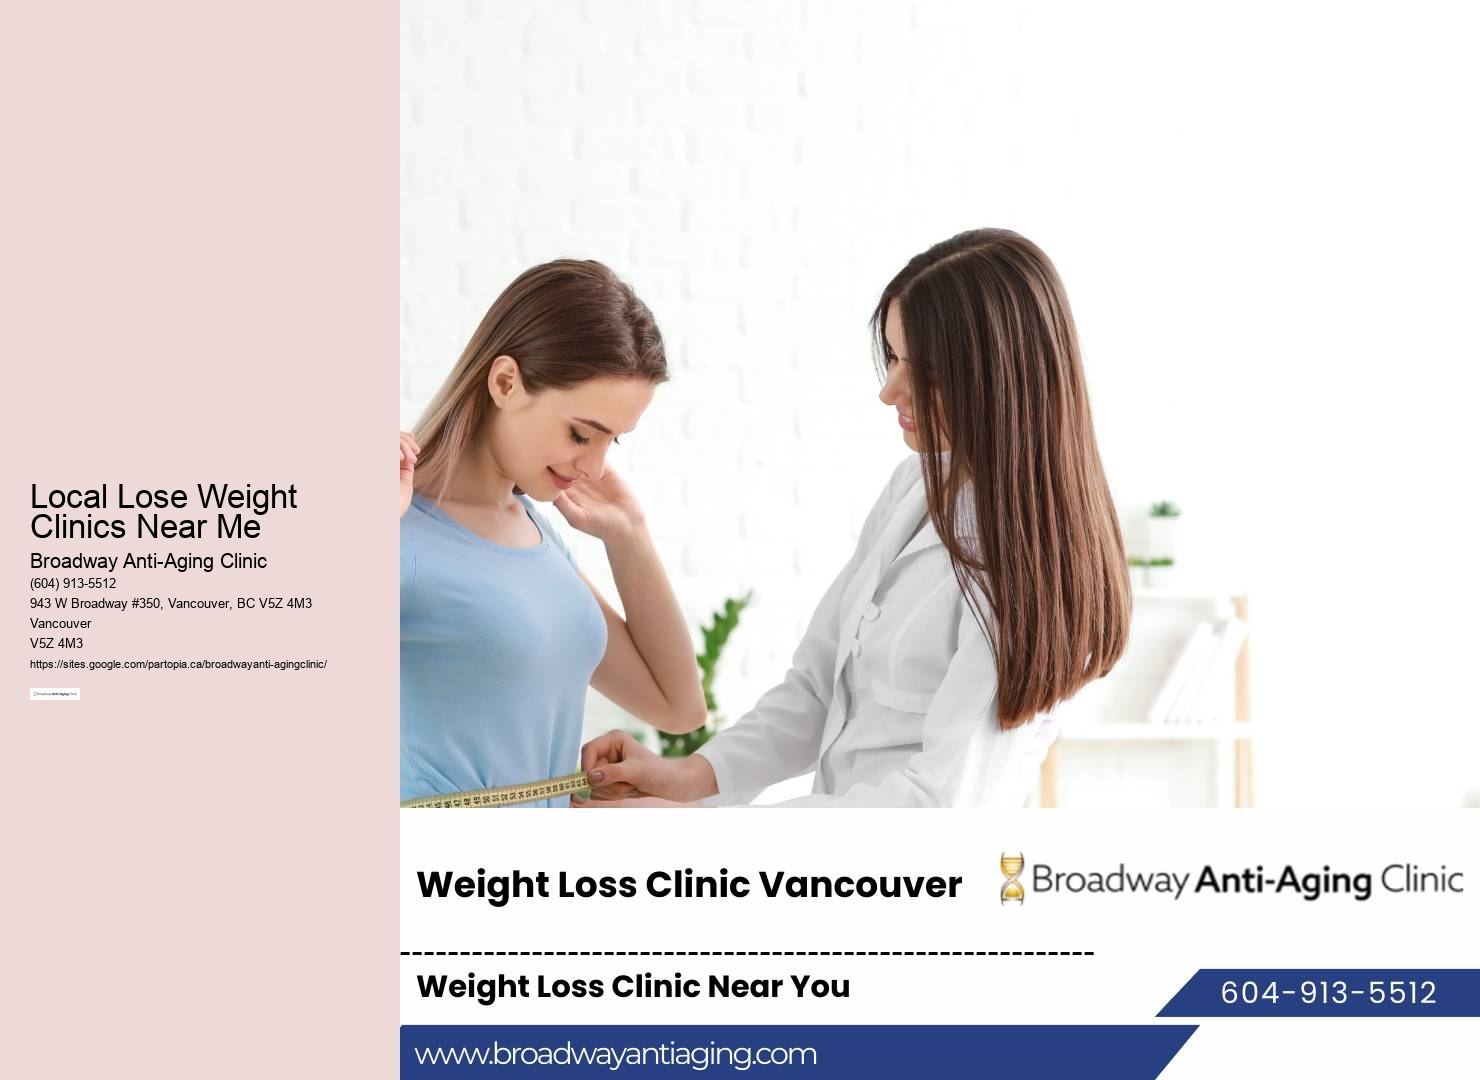 Local Lose Weight Clinics Near Me